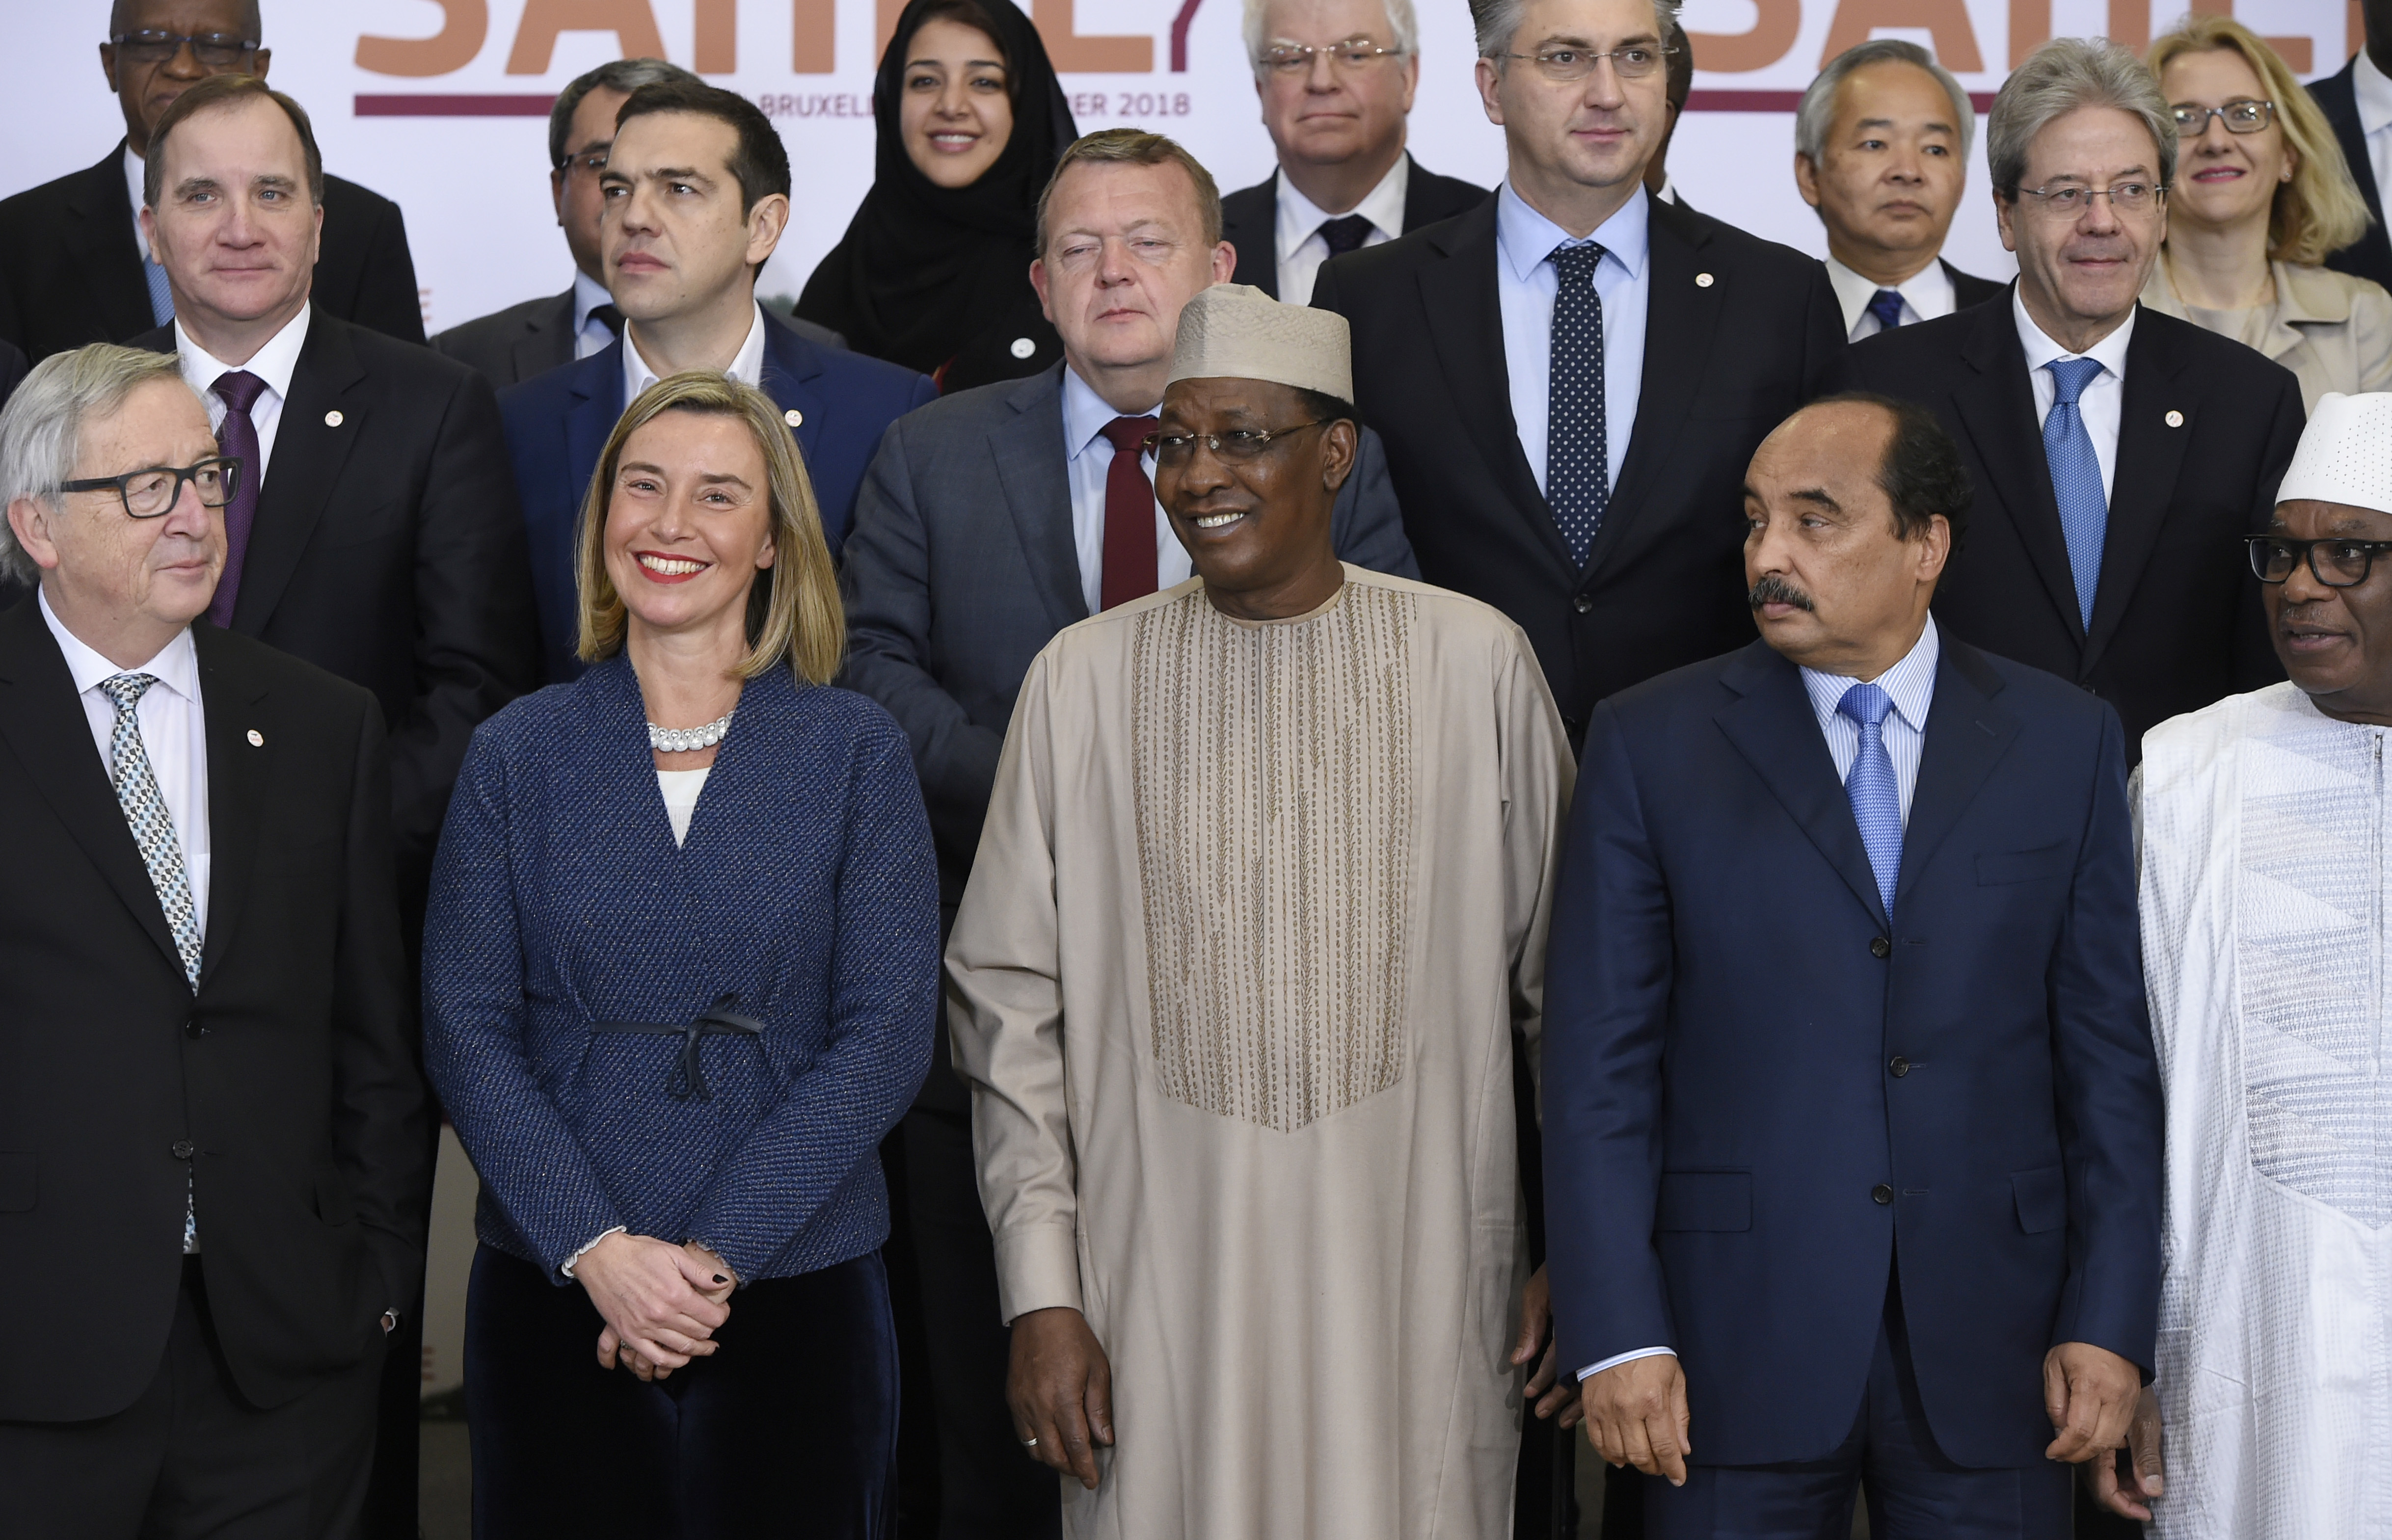 European Union foreign policy chief Federica Mogherini, front row second left, and Chad's President Idriss Deby, front row center, stand with EU and Sahel leaders during a group photo at an EU-Sahel meeting at EU headquarters in Brussels on Friday, Feb. 23, 2018. European Union leaders meet Friday with counterparts from Africa's Sahel in a show of support for the impoverished region fallen prey to extremists and a key transit point for migrants heading to Europe. (John Thys, Pool Photo via AP)